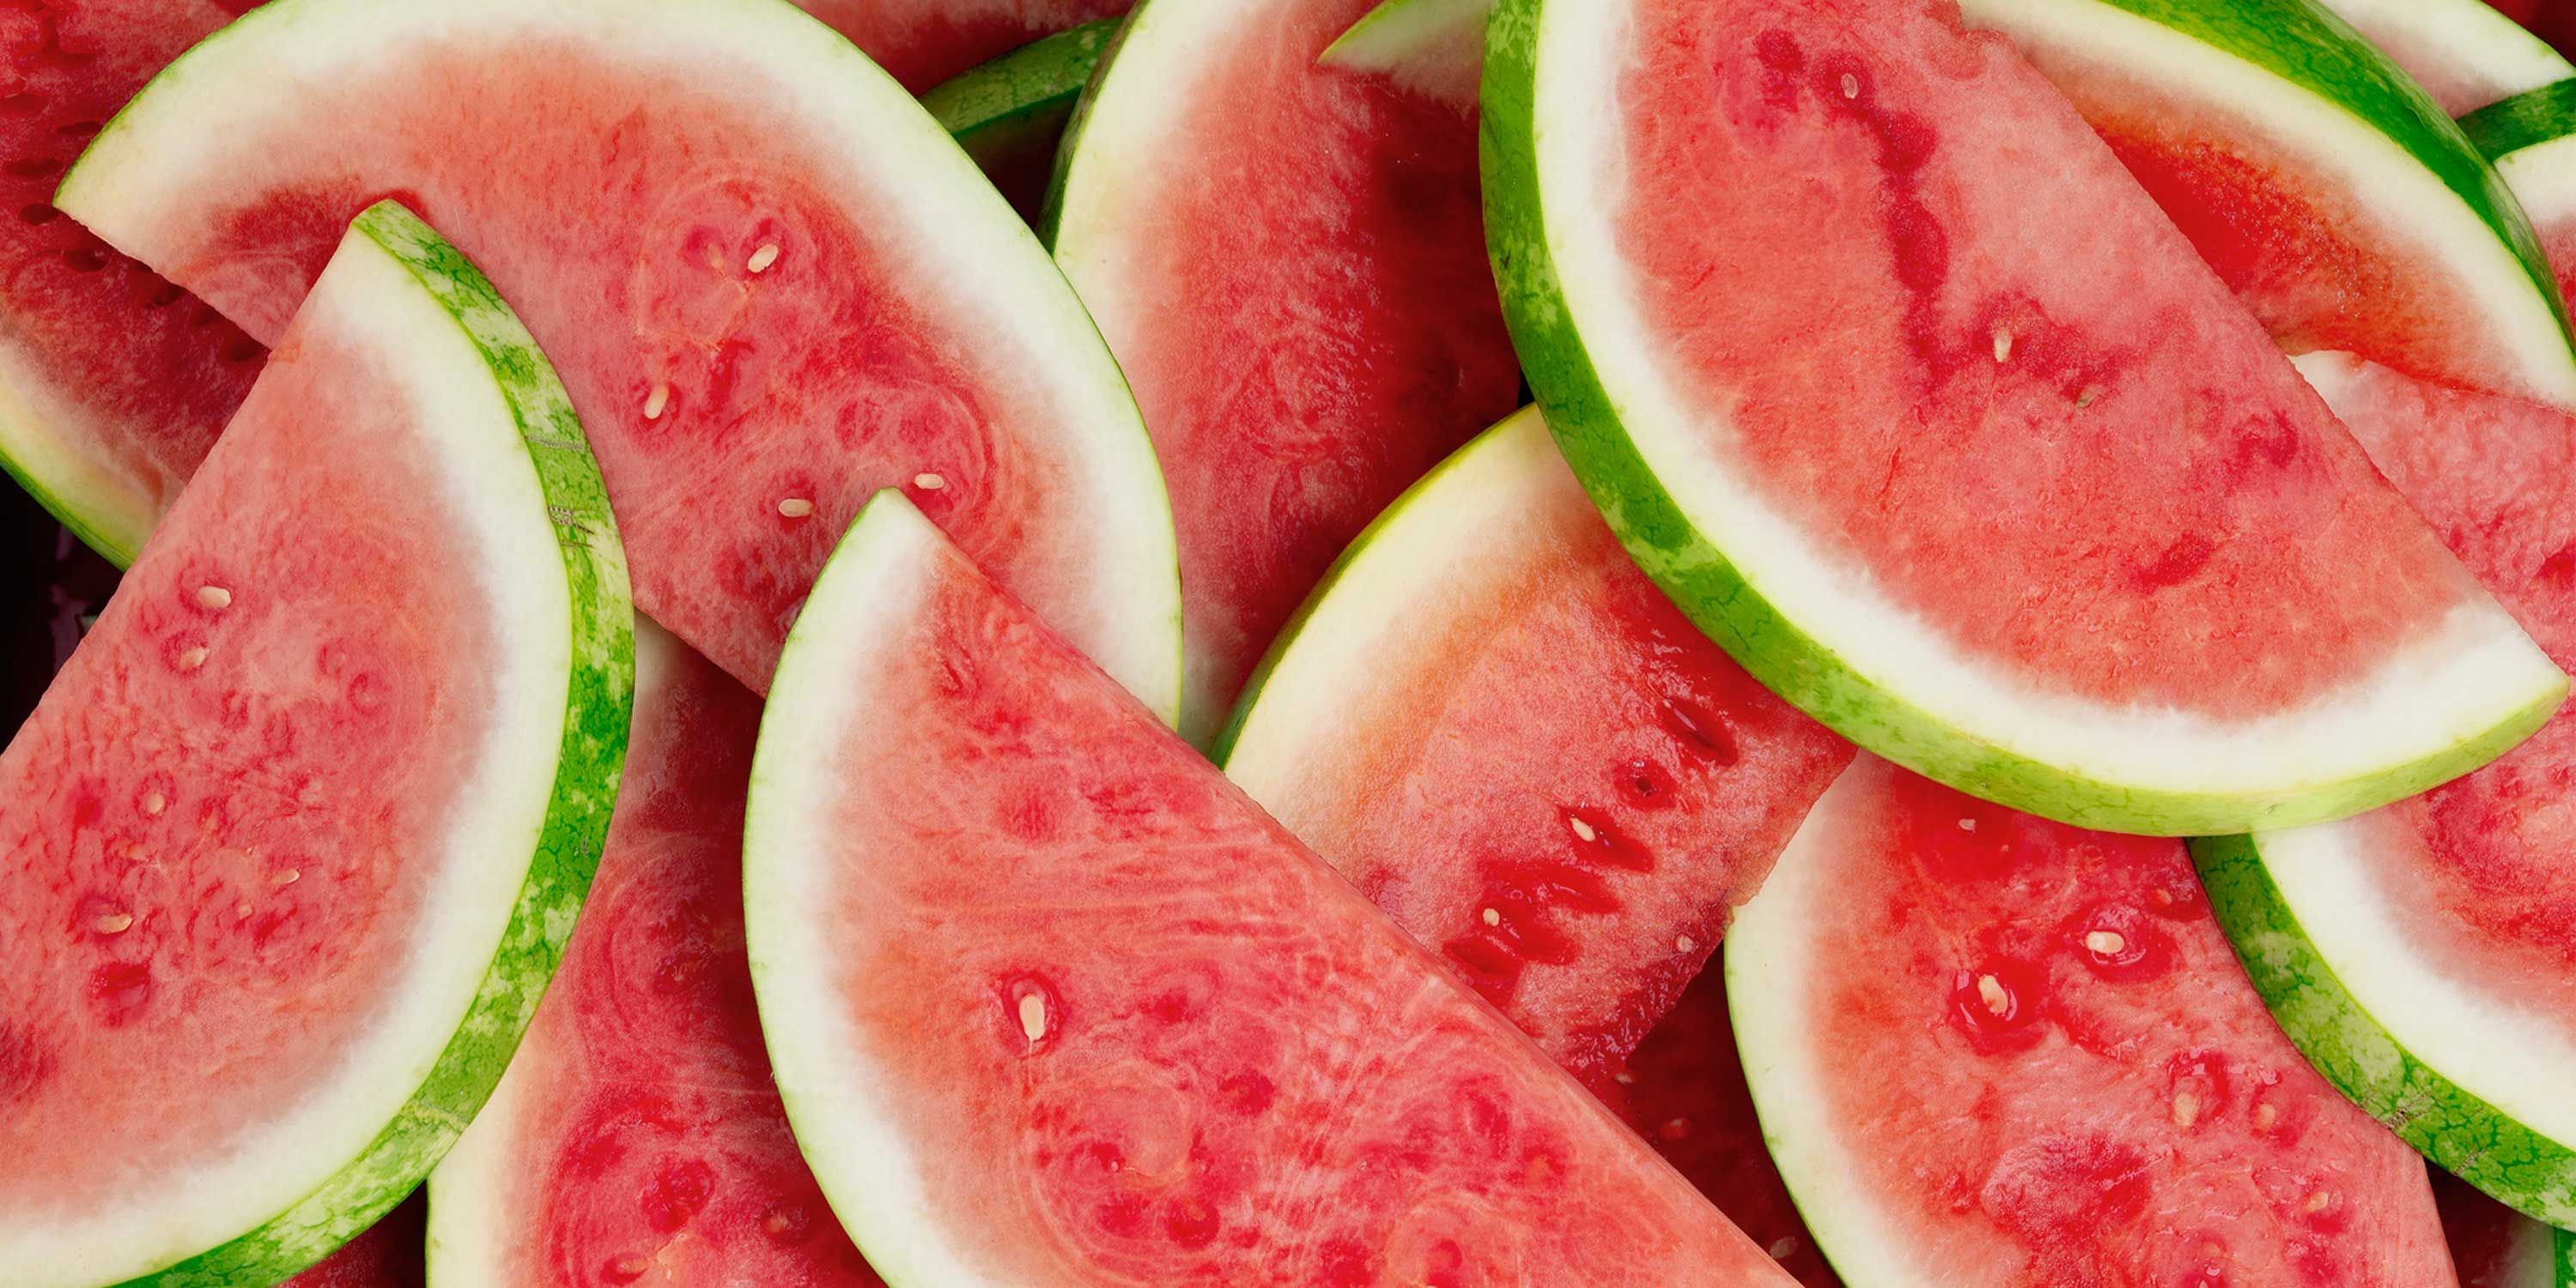 16 Best Summer Foods Fruits And Vegetables To Eat In The